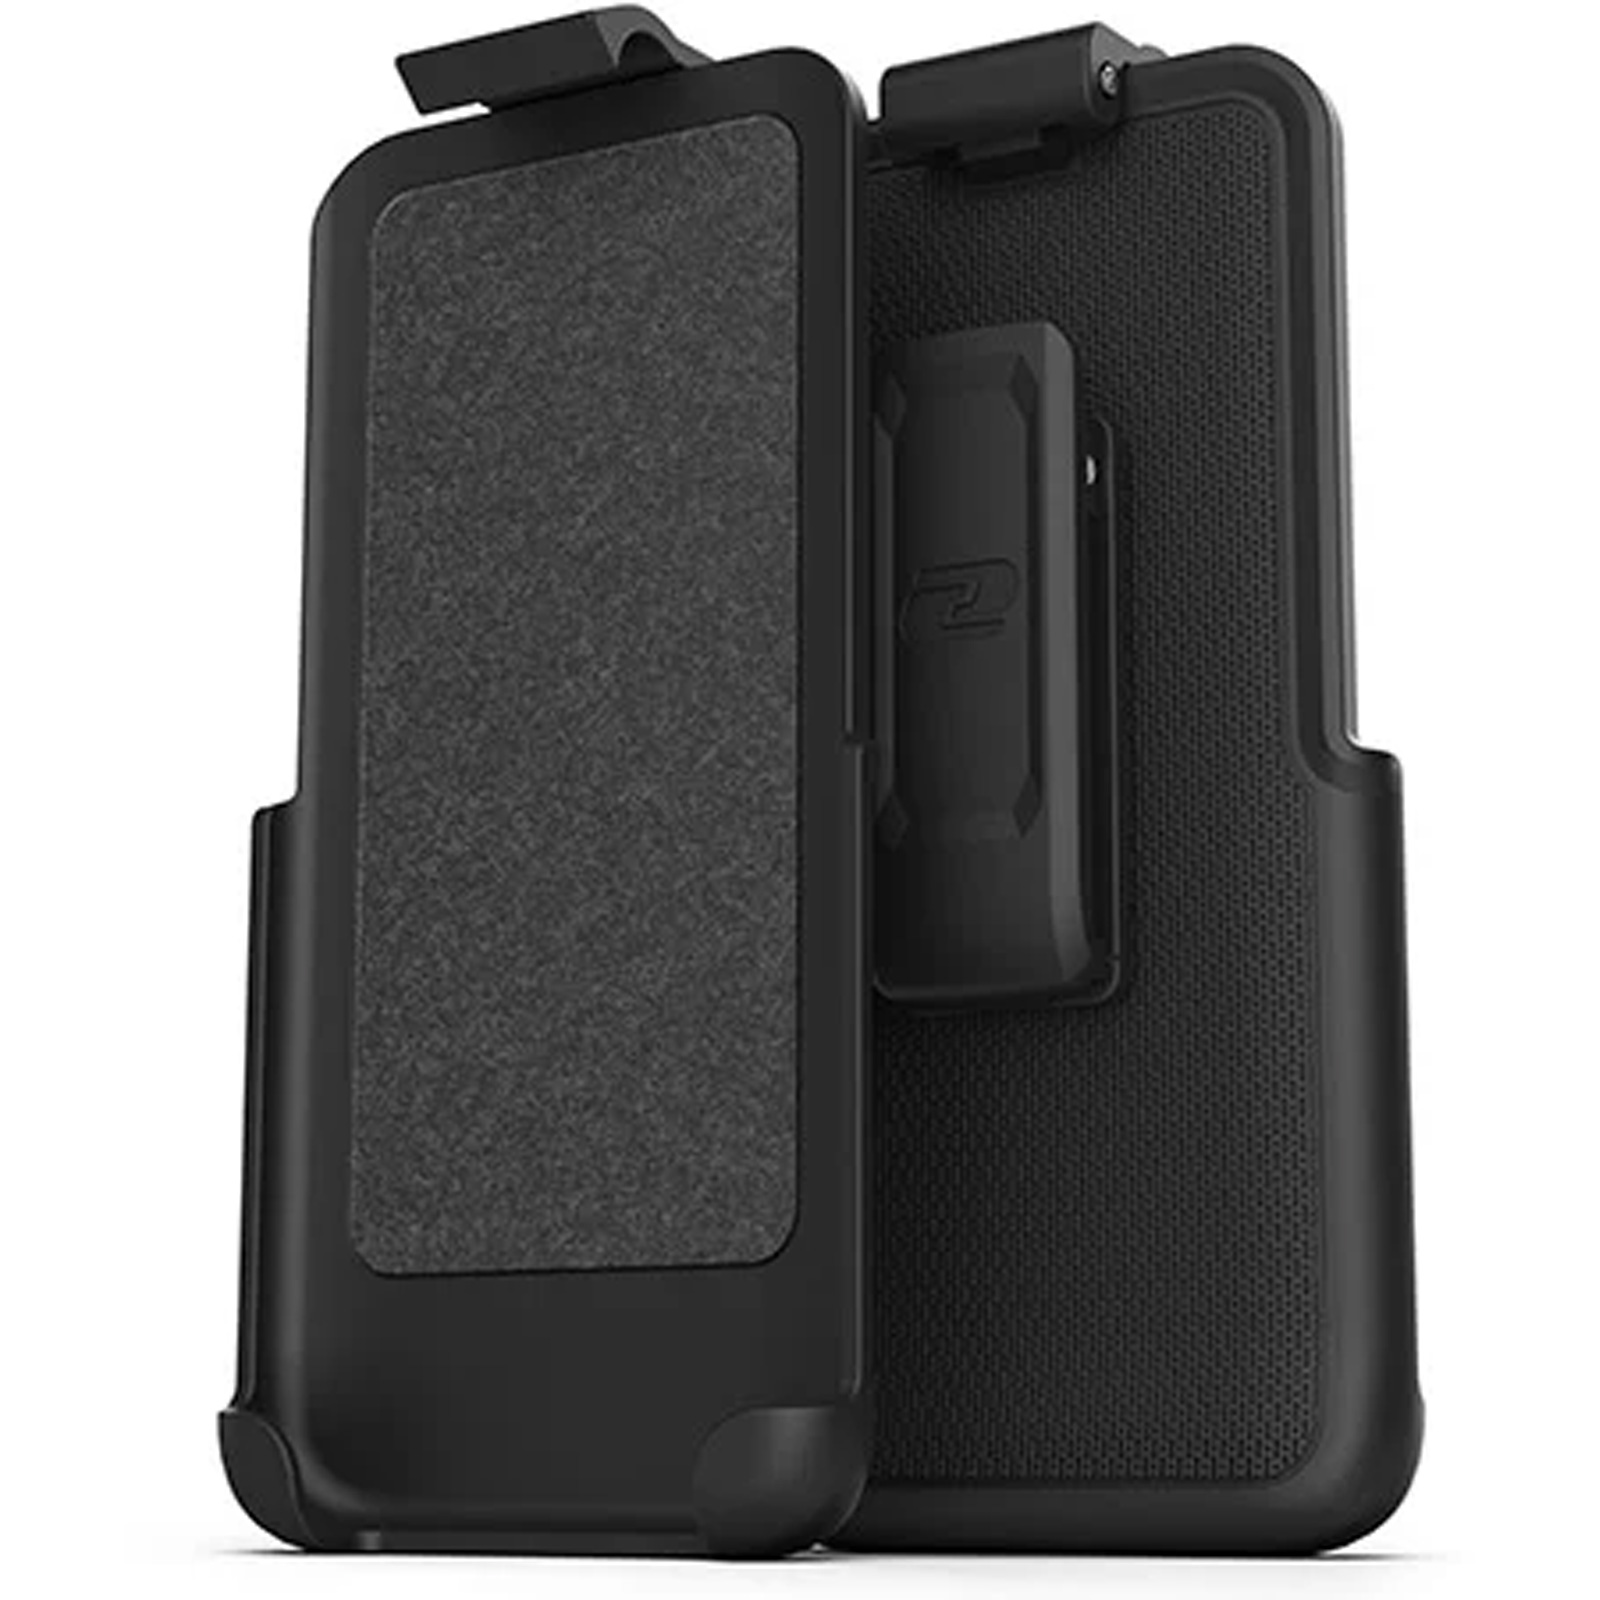 Samsung Galaxy S24 Ultra ClearBack Case with Belt Clip Holster - Encased